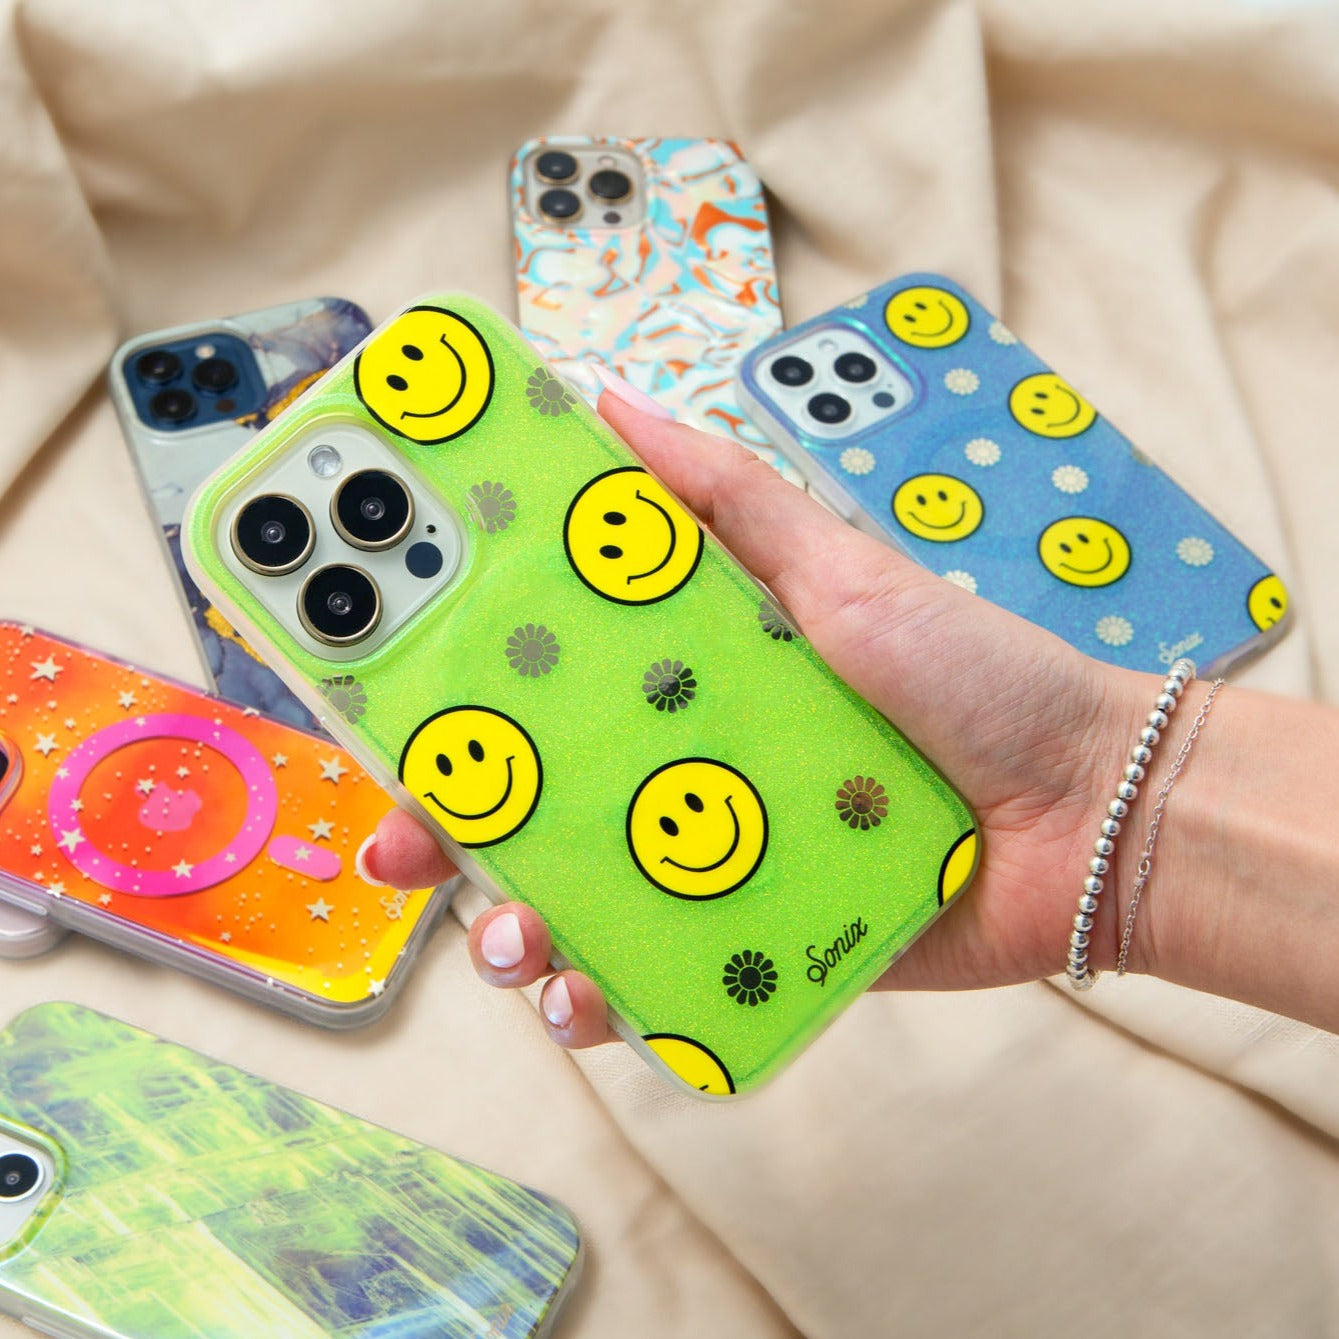 The clear yellow case infused with iridescent glitter features happy faces and signature gold foil flowers shown on an iphone being held by a hand